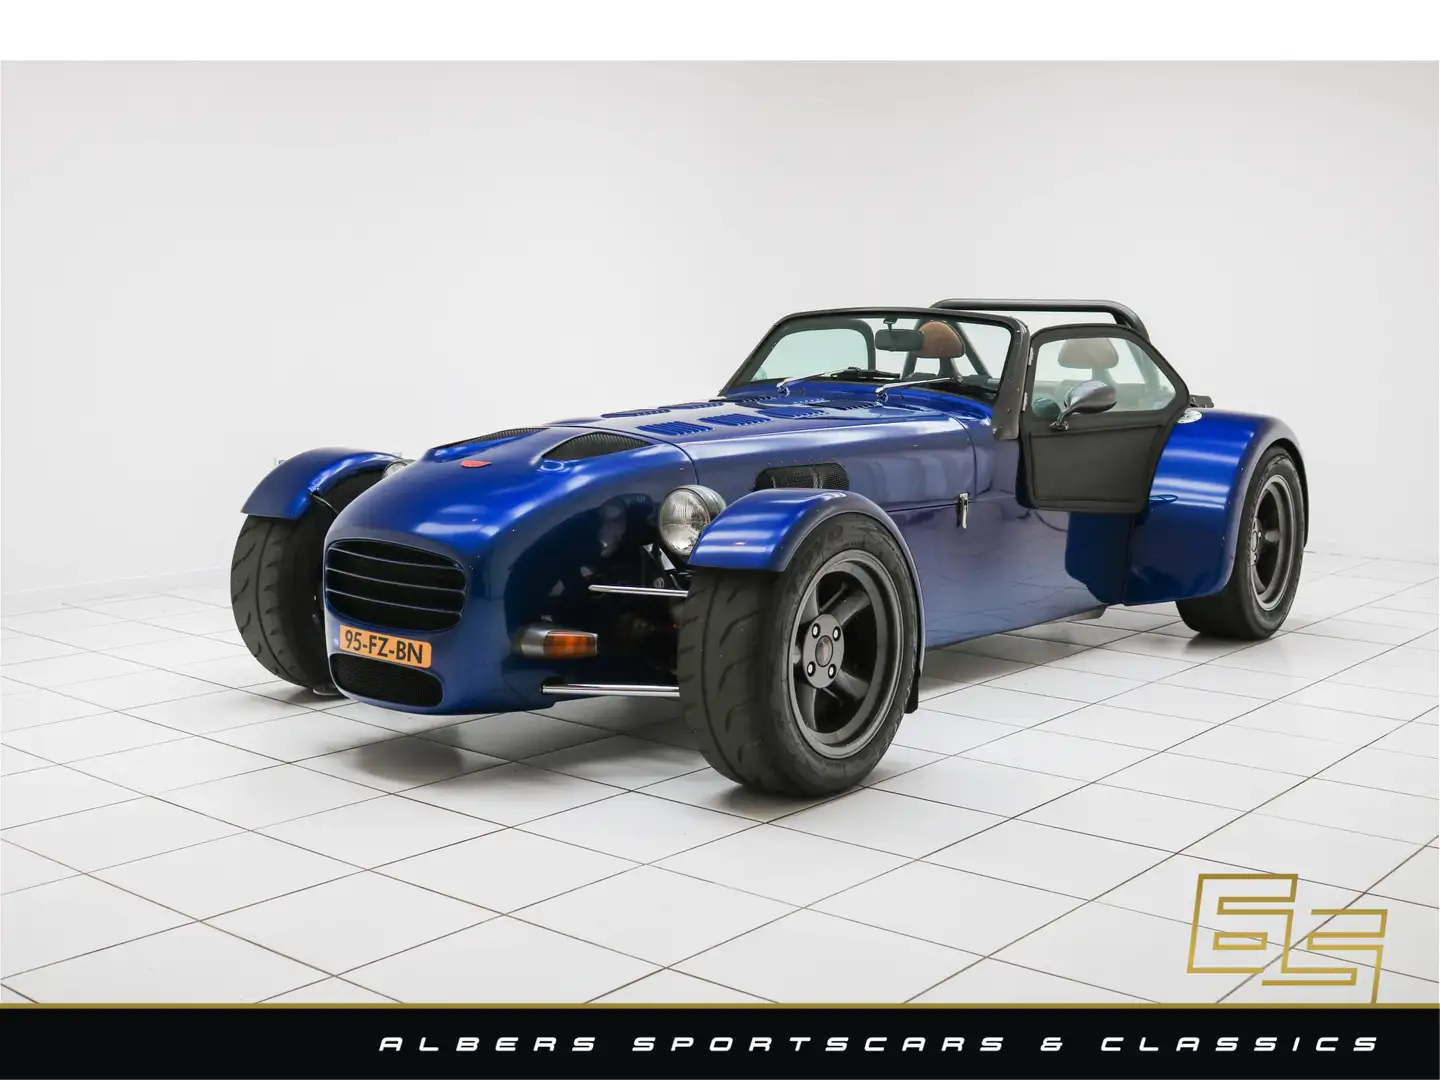 Donkervoort D8 1.8 Audi 150 Touring * 260 hp * Good Condition * Azul - 1